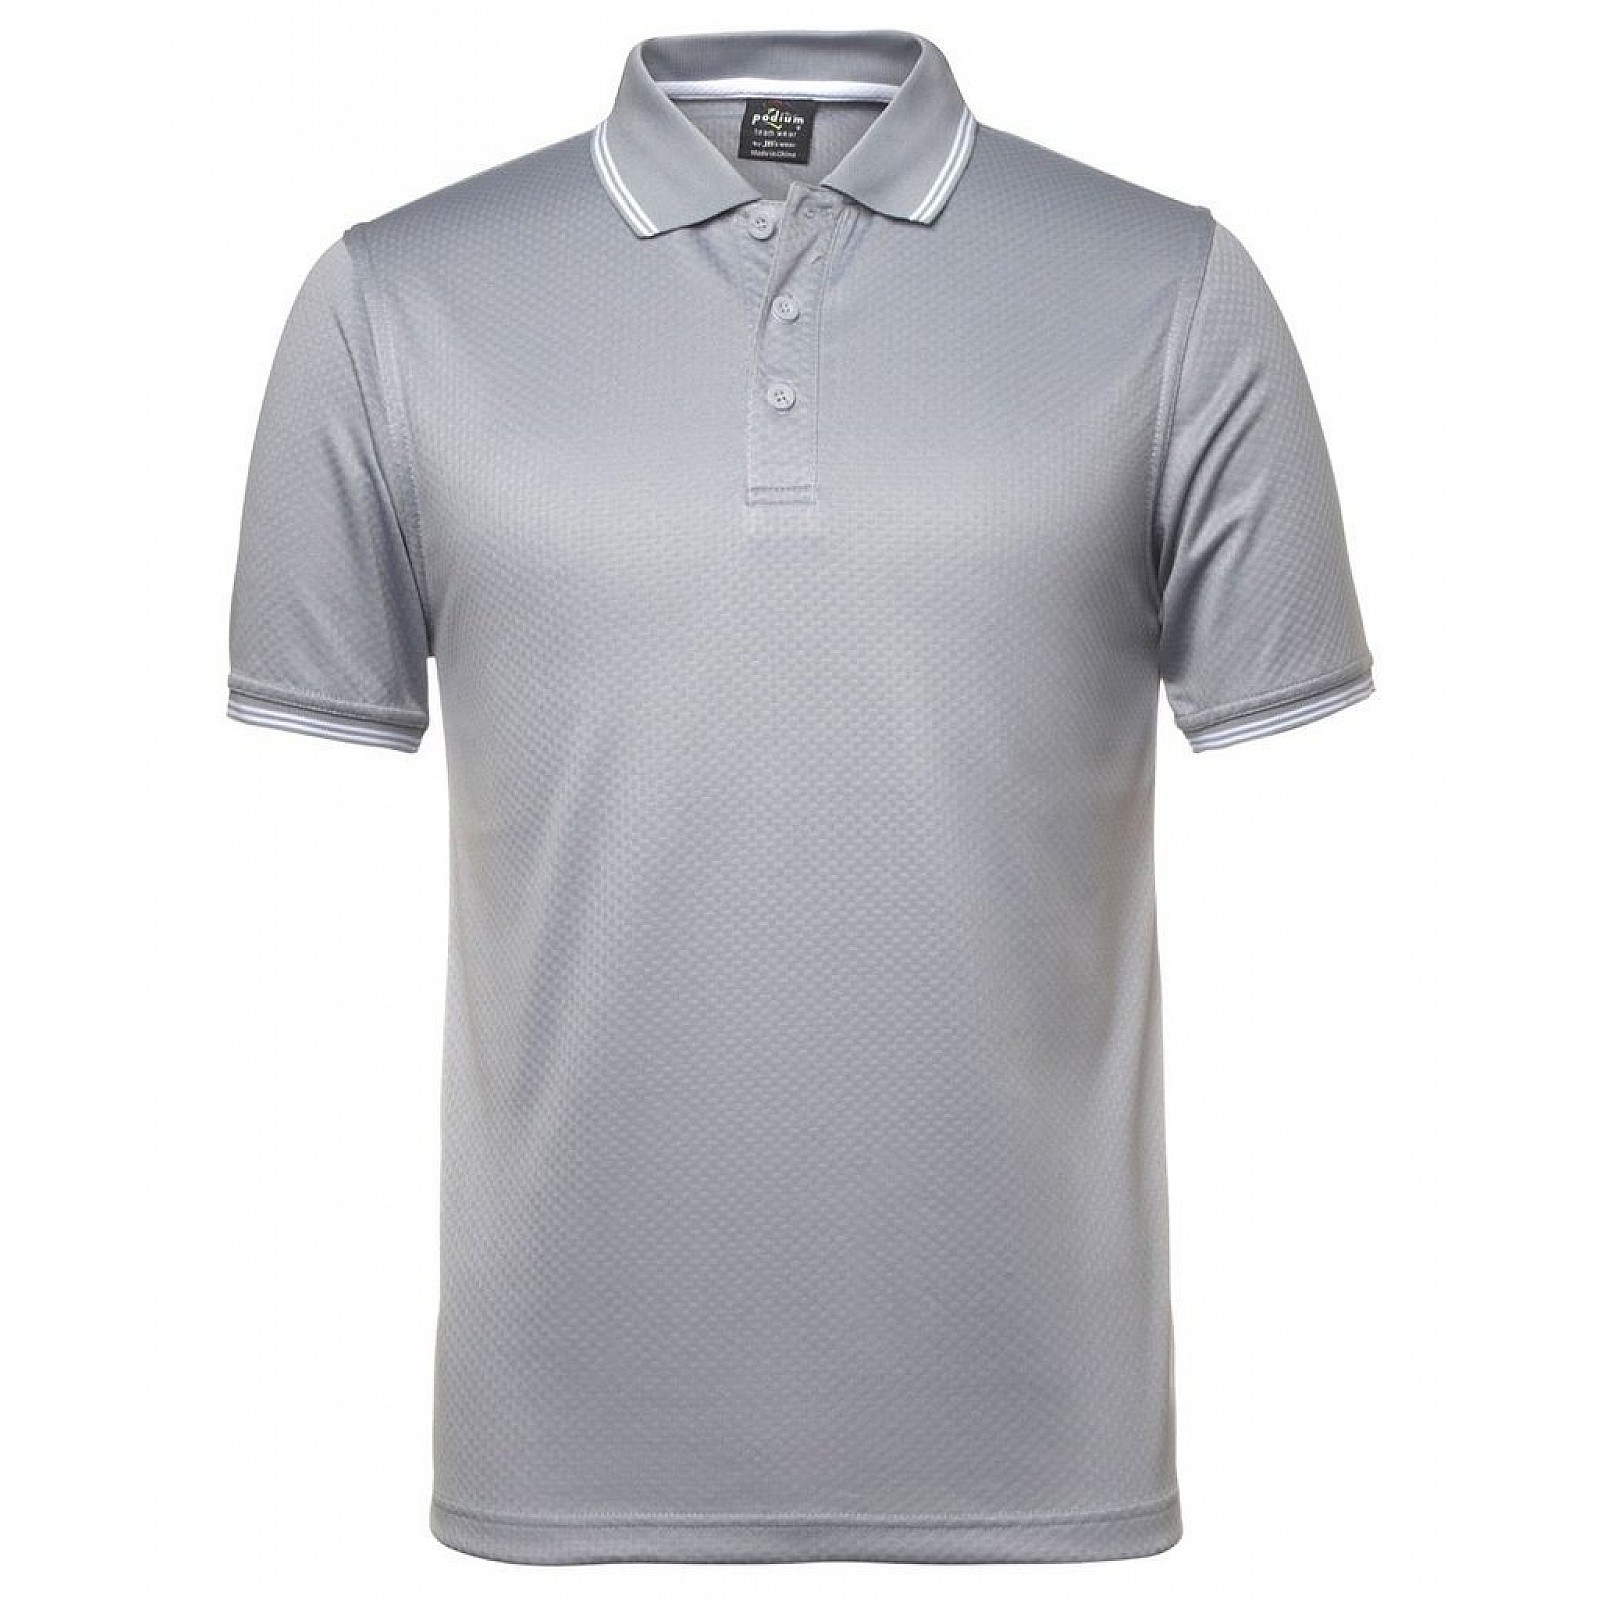 Polo Shirt With Pin Stripe Colar and Sleeves | Buy Online Protective ...